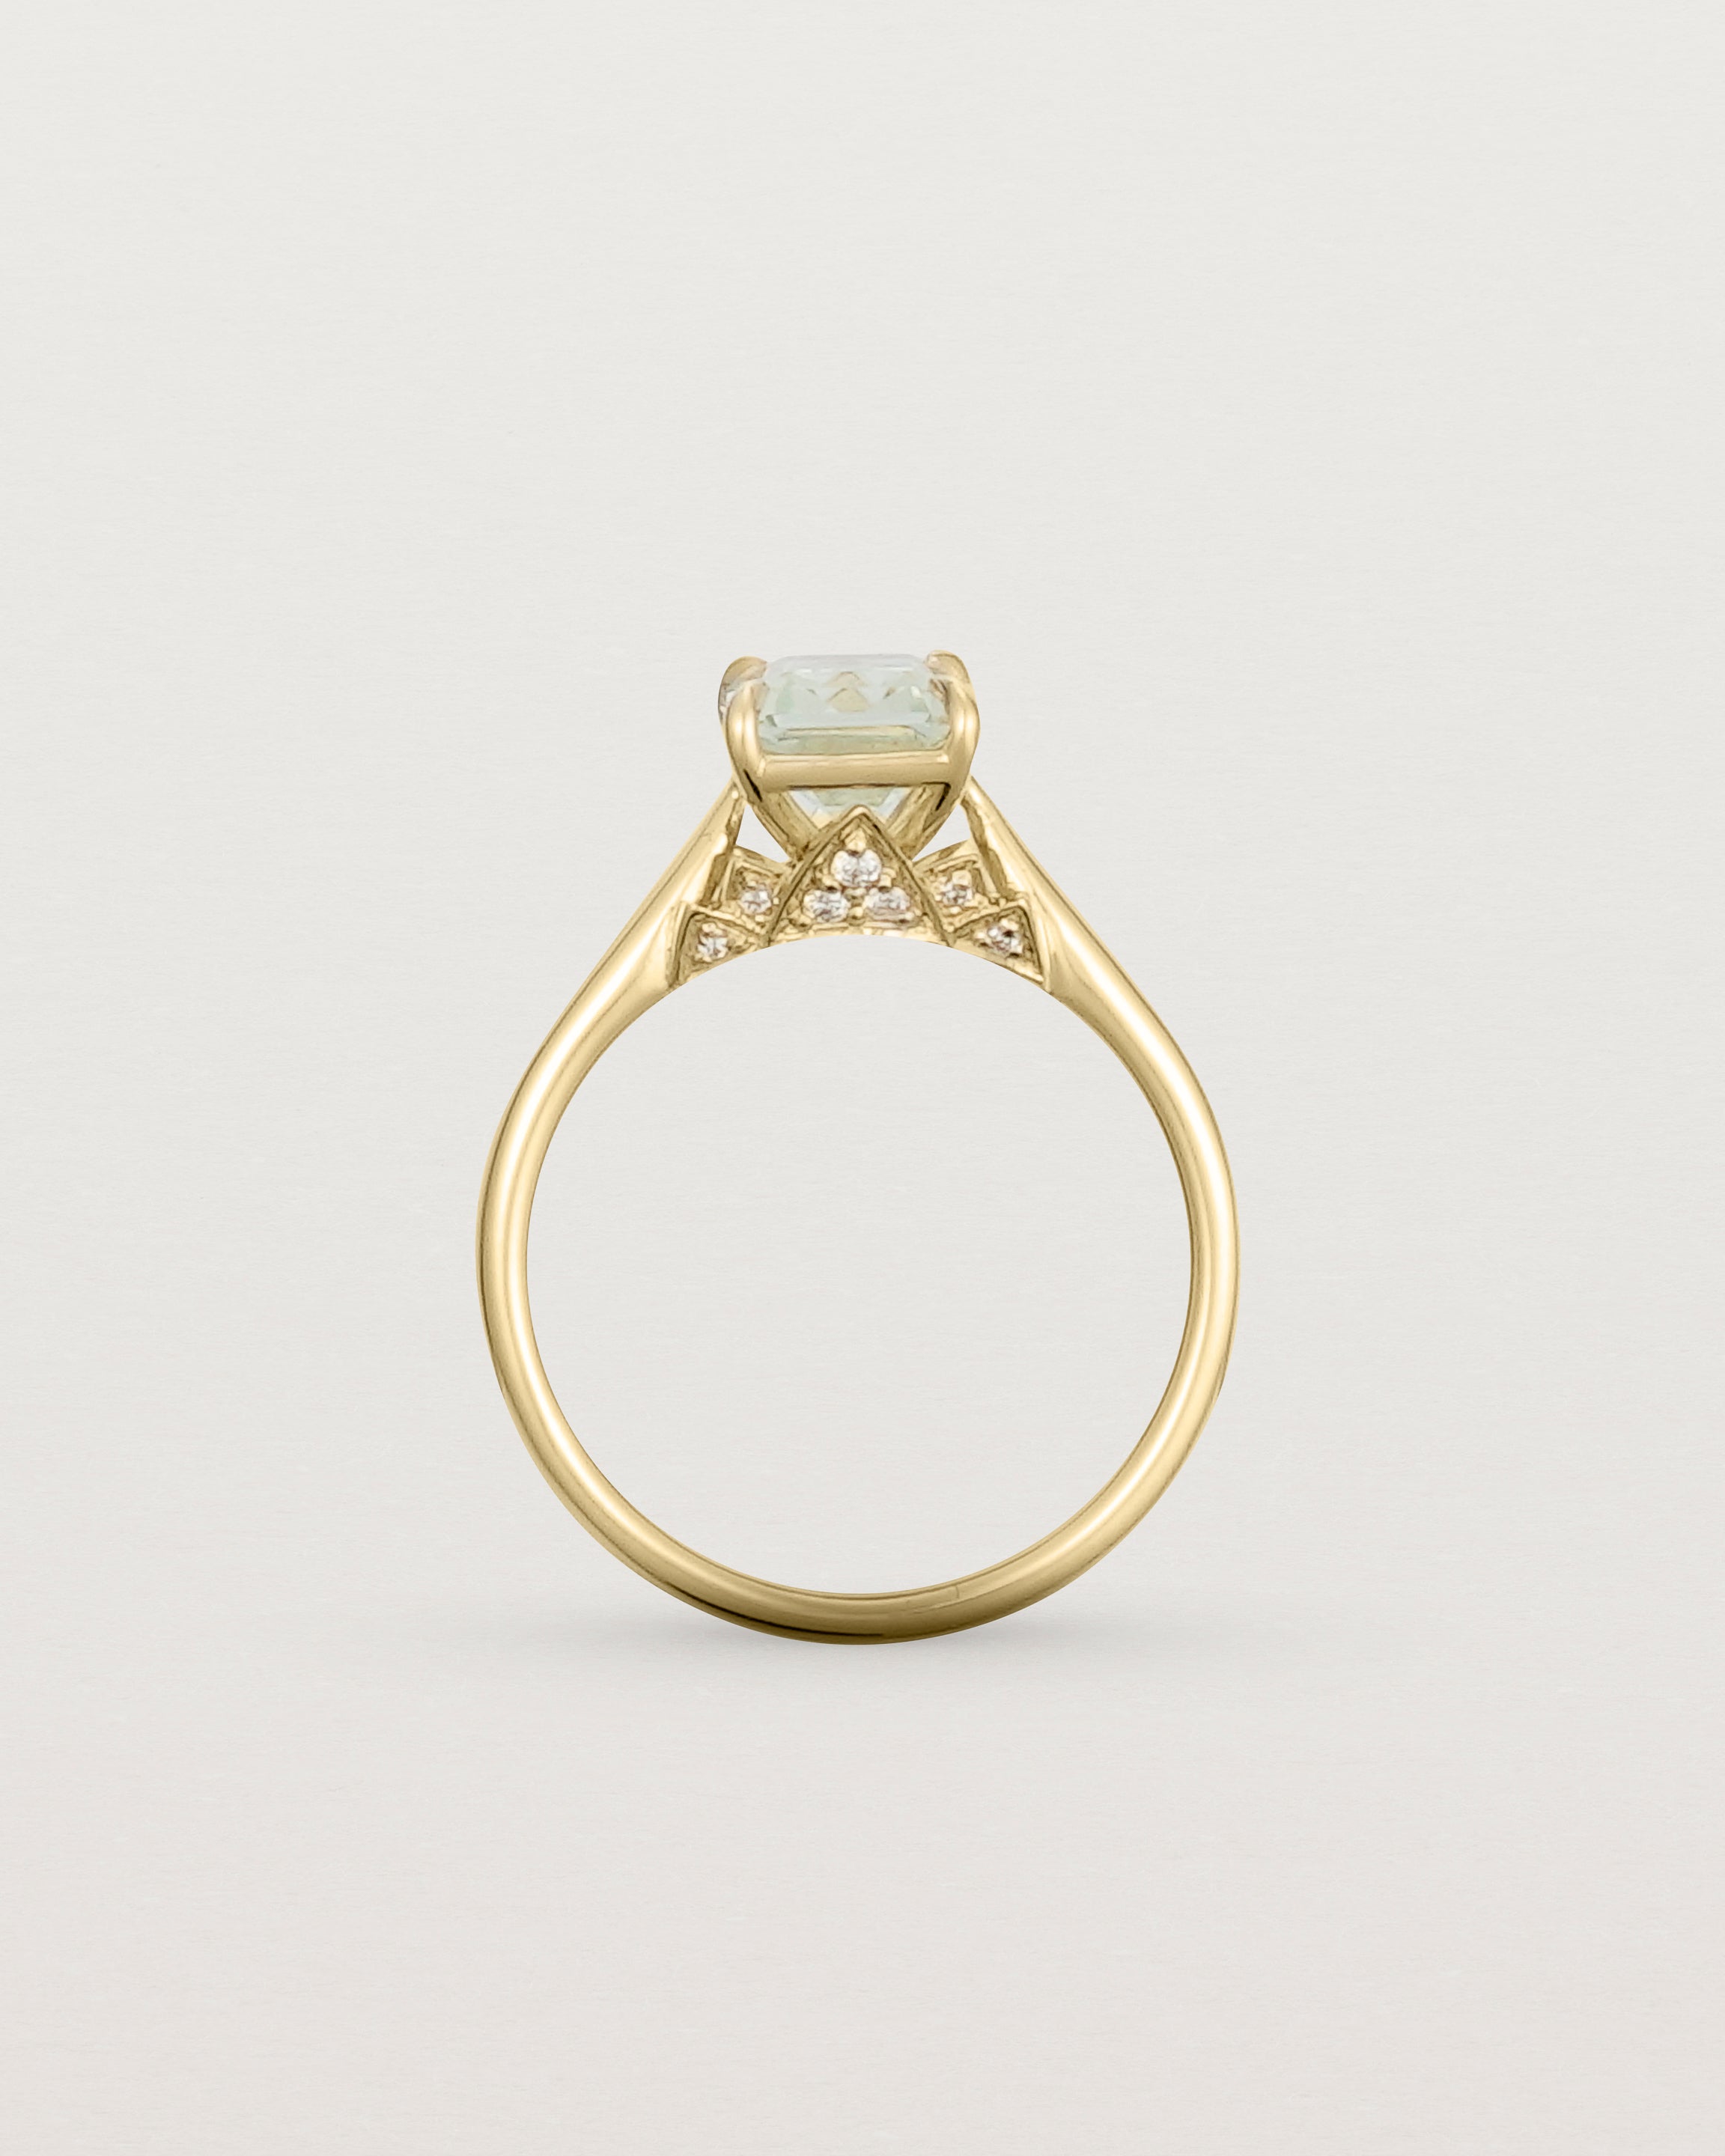 Standing view of the Front view of the Kalina Emerald Solitaire | Green Amethyst | Yellow Gold.